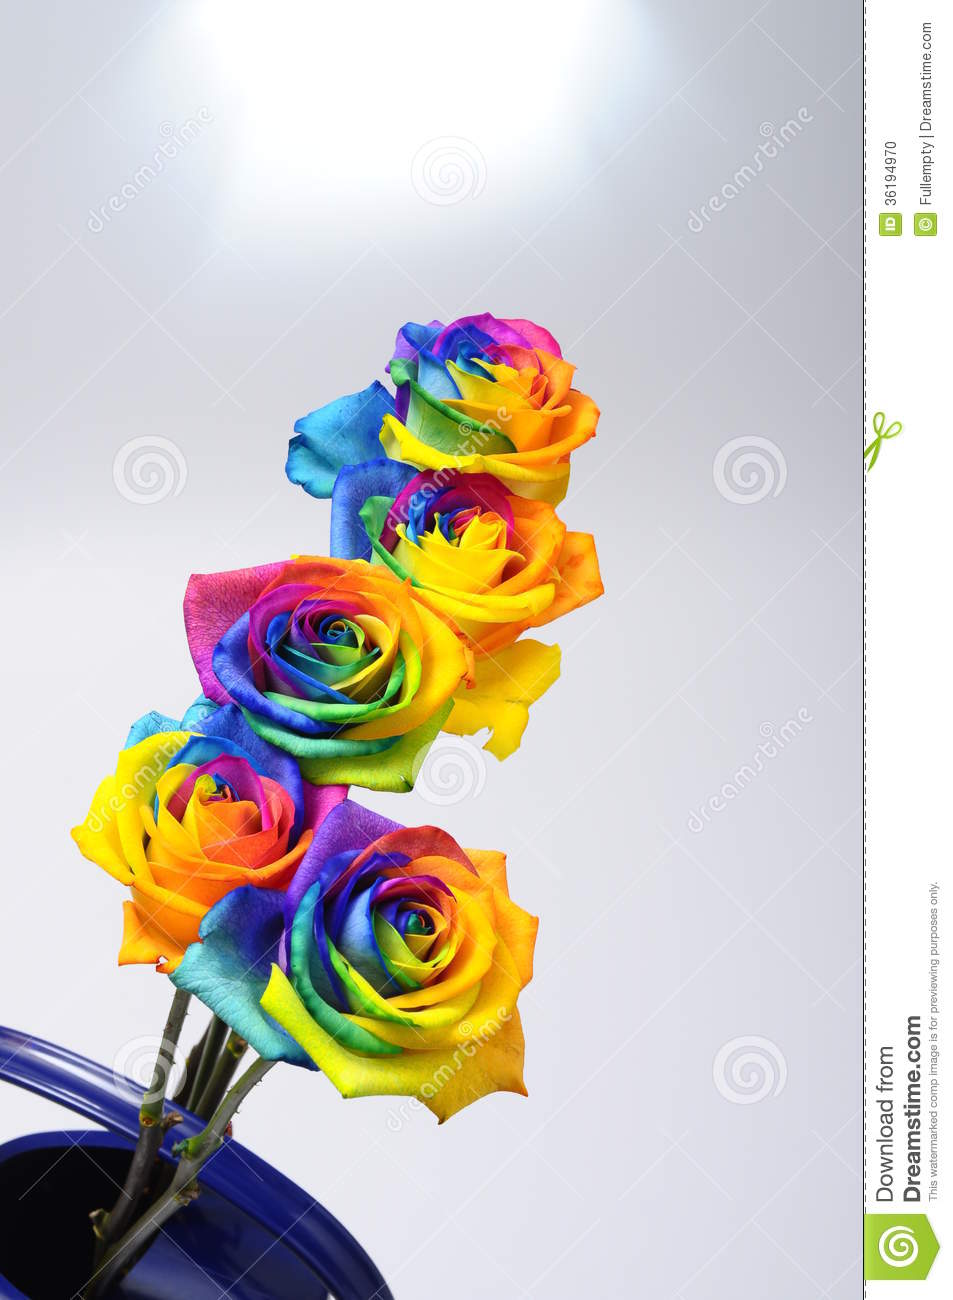 Bouquet Of Happy Flower   Rainbow Rose With Colored Petals